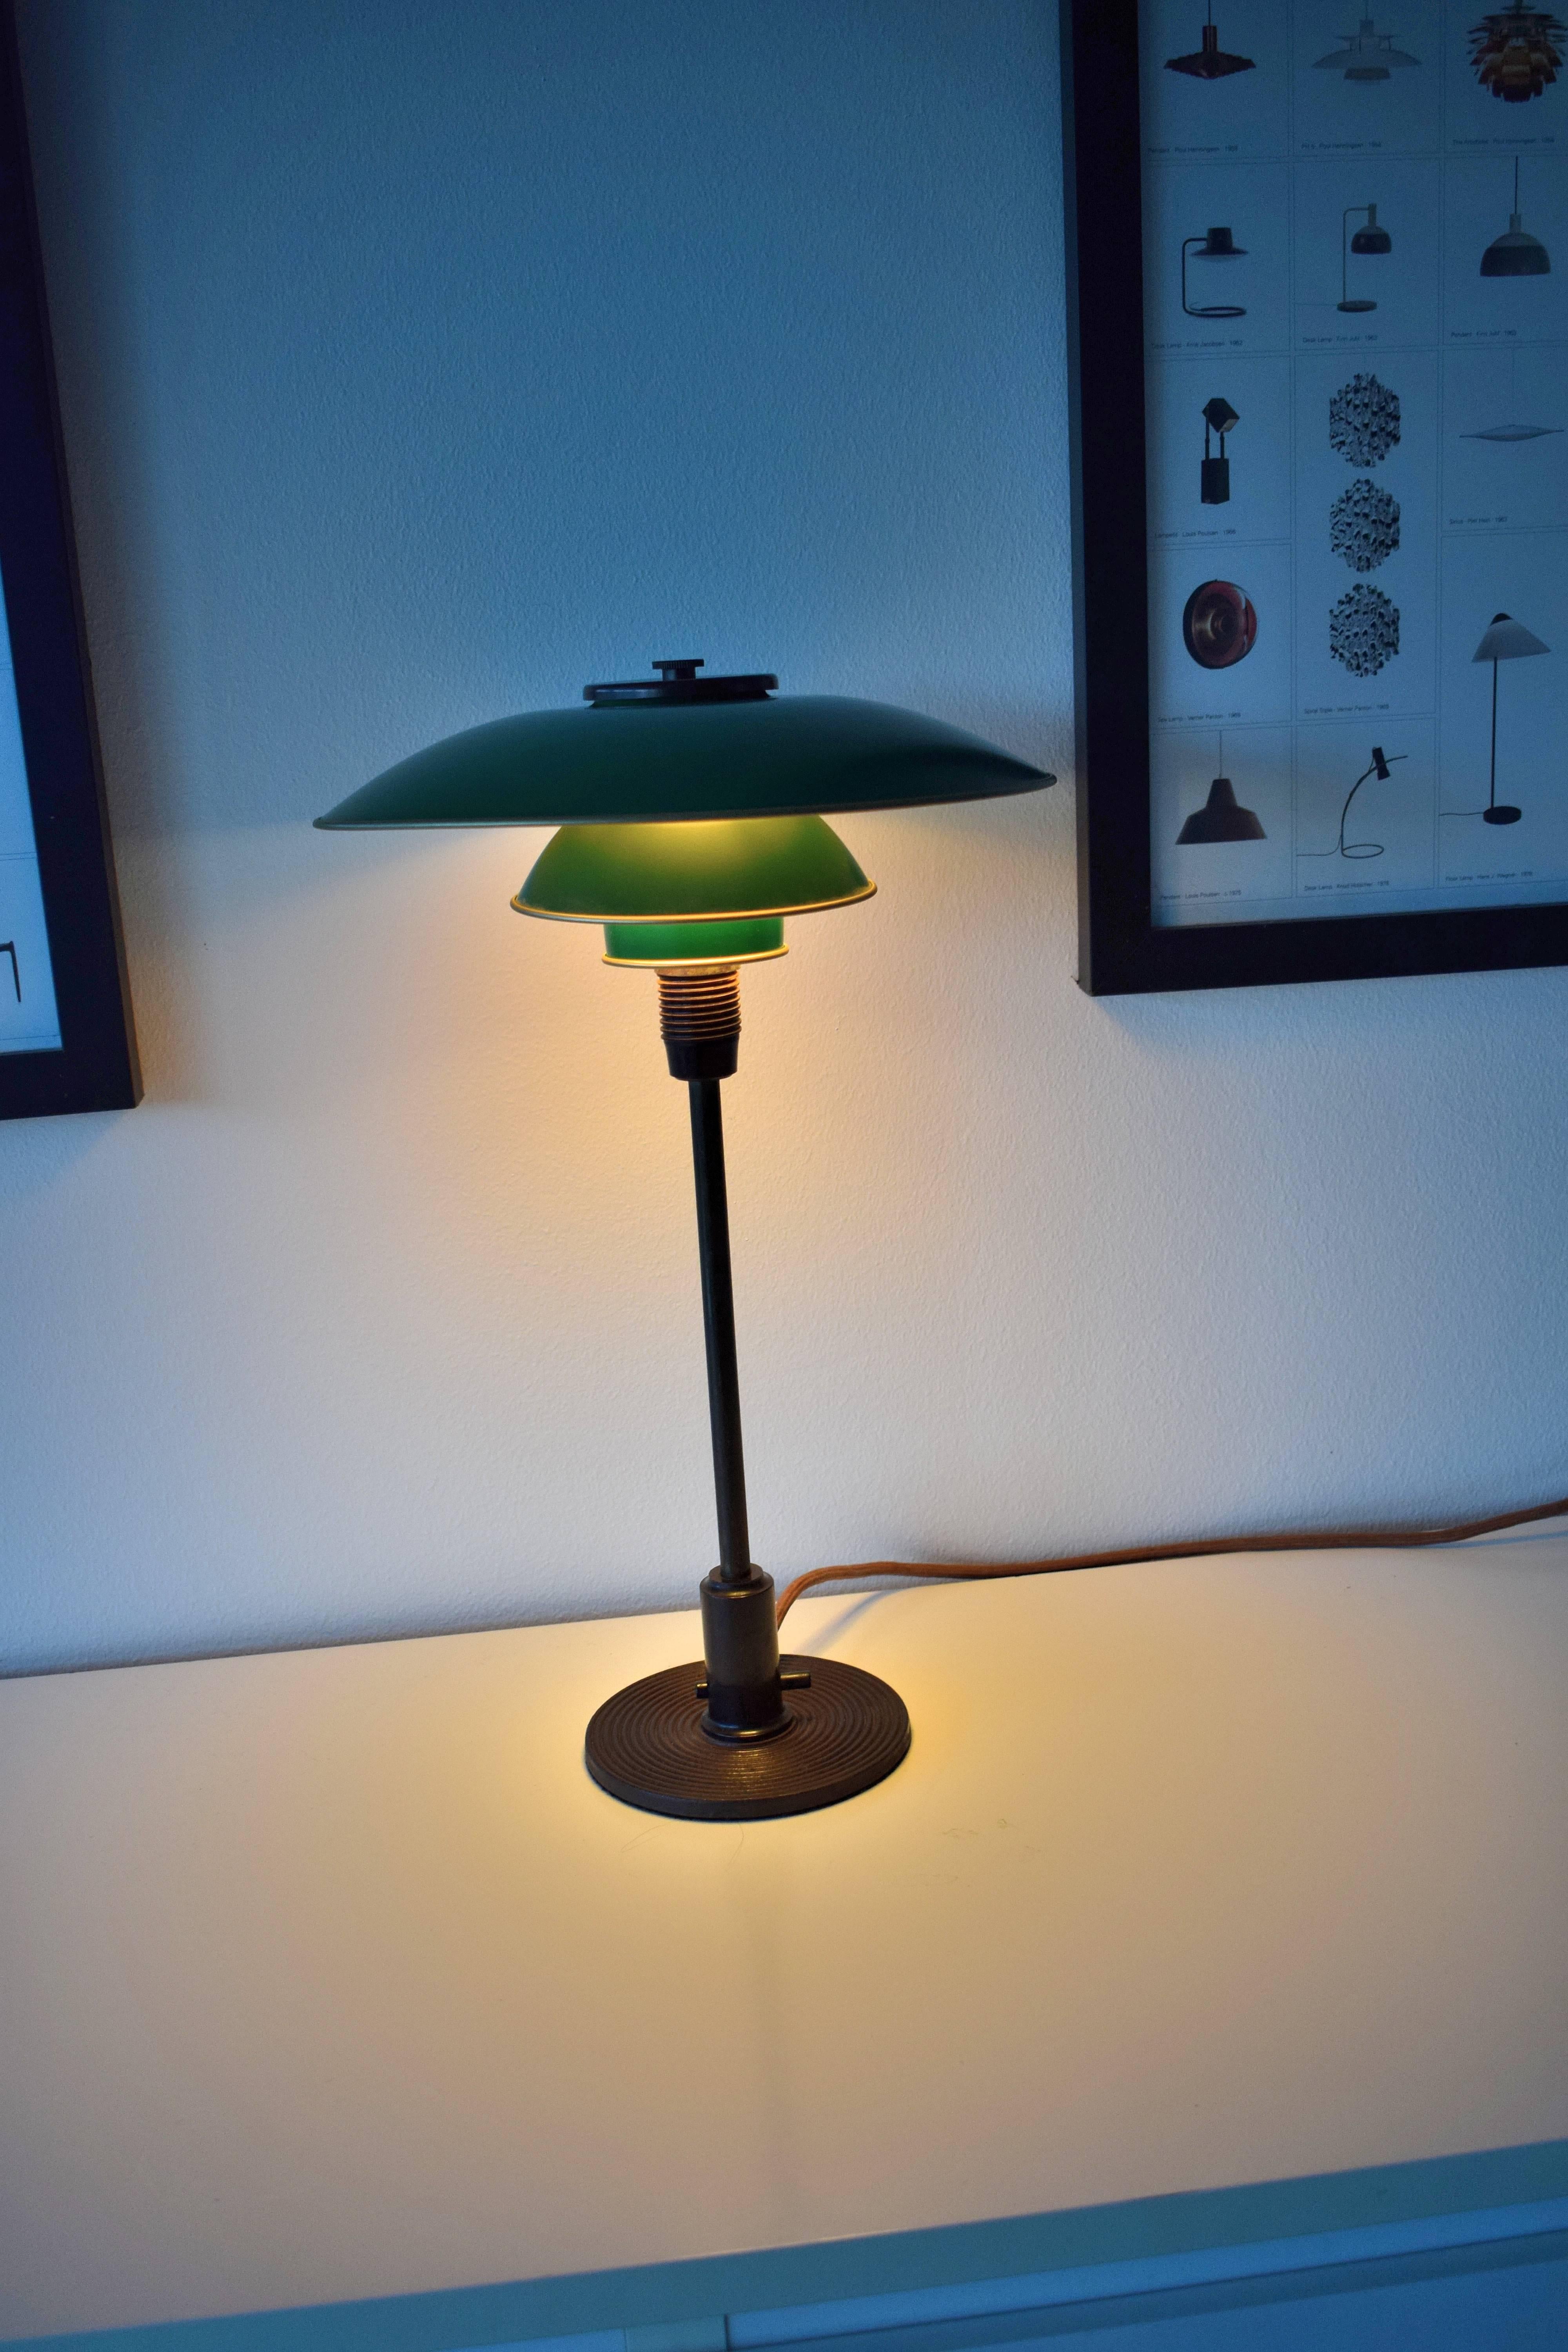 PH 3/2 table lamp by Poul Henningsen. Green metal shades patinated brass stem and Bakelite detailing. Through-switch of bakelite
Manufactured by Louis Poulsen in Denmark, circa 1930.